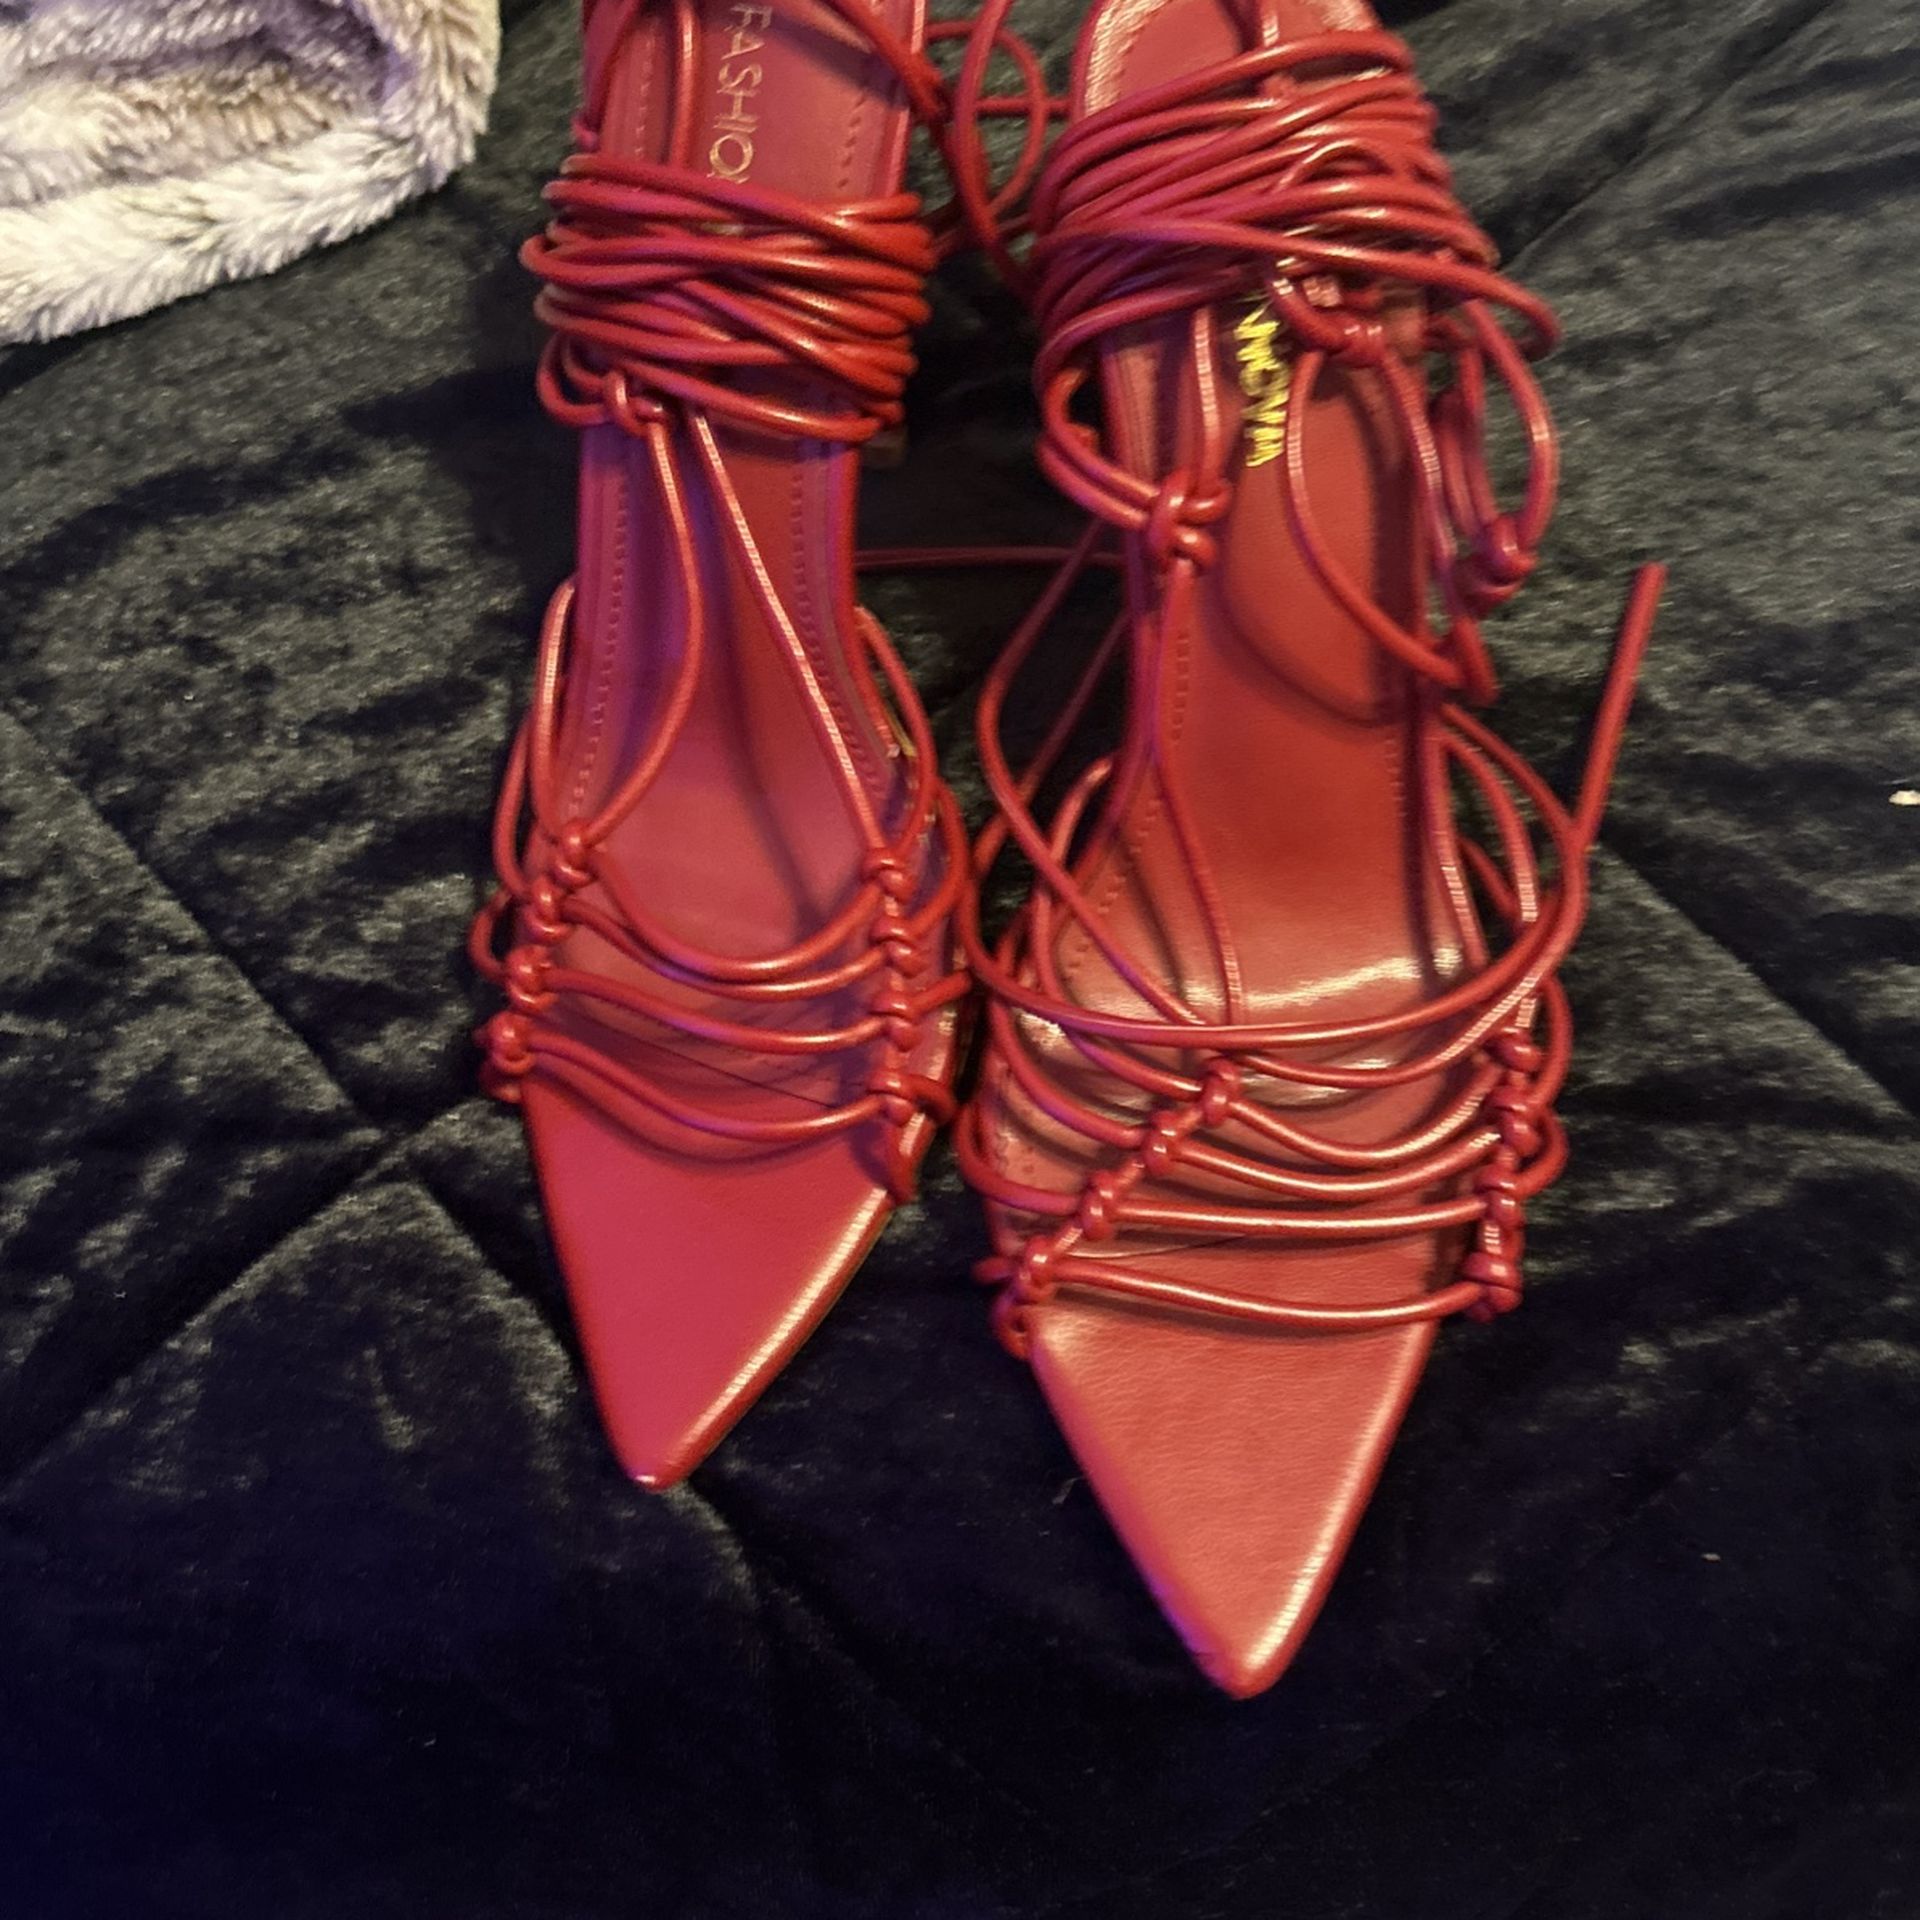 Red Lace Up Heels